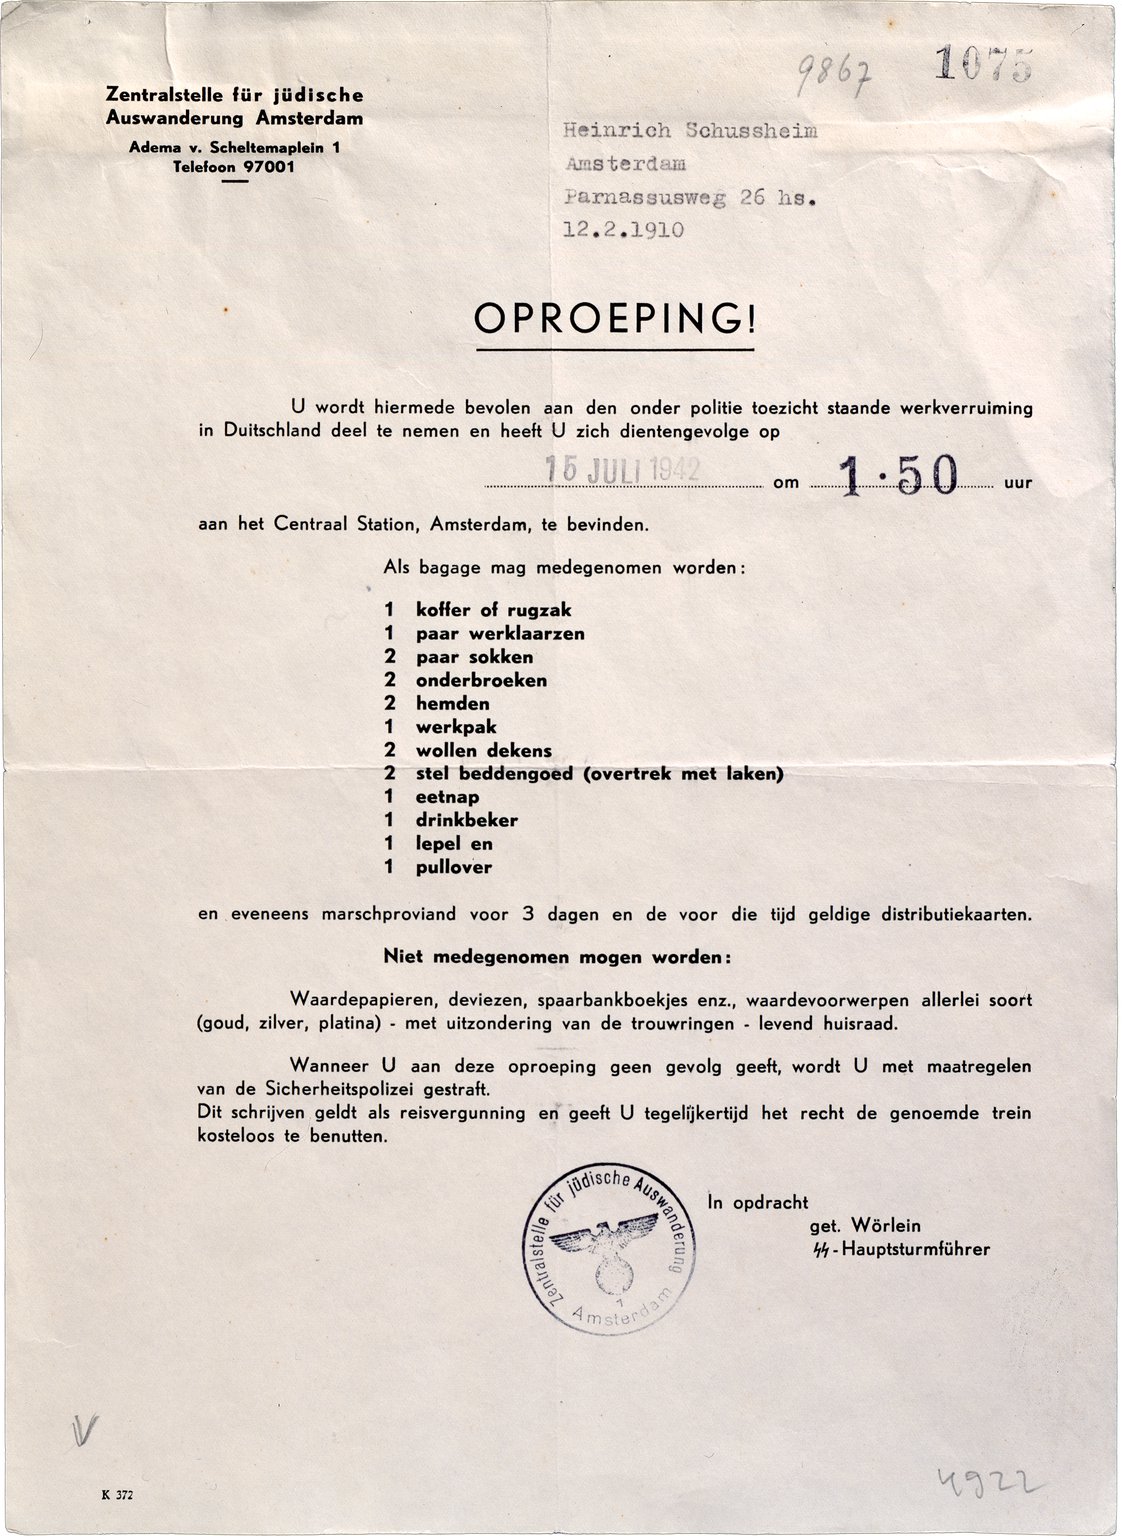 The Jews who have been called up are given this form at the Zentralstelle für jüdische Auswanderung. It specifies what they can take with them, for example work clothes and work boots, and when they have to leave, 16 July 1942.